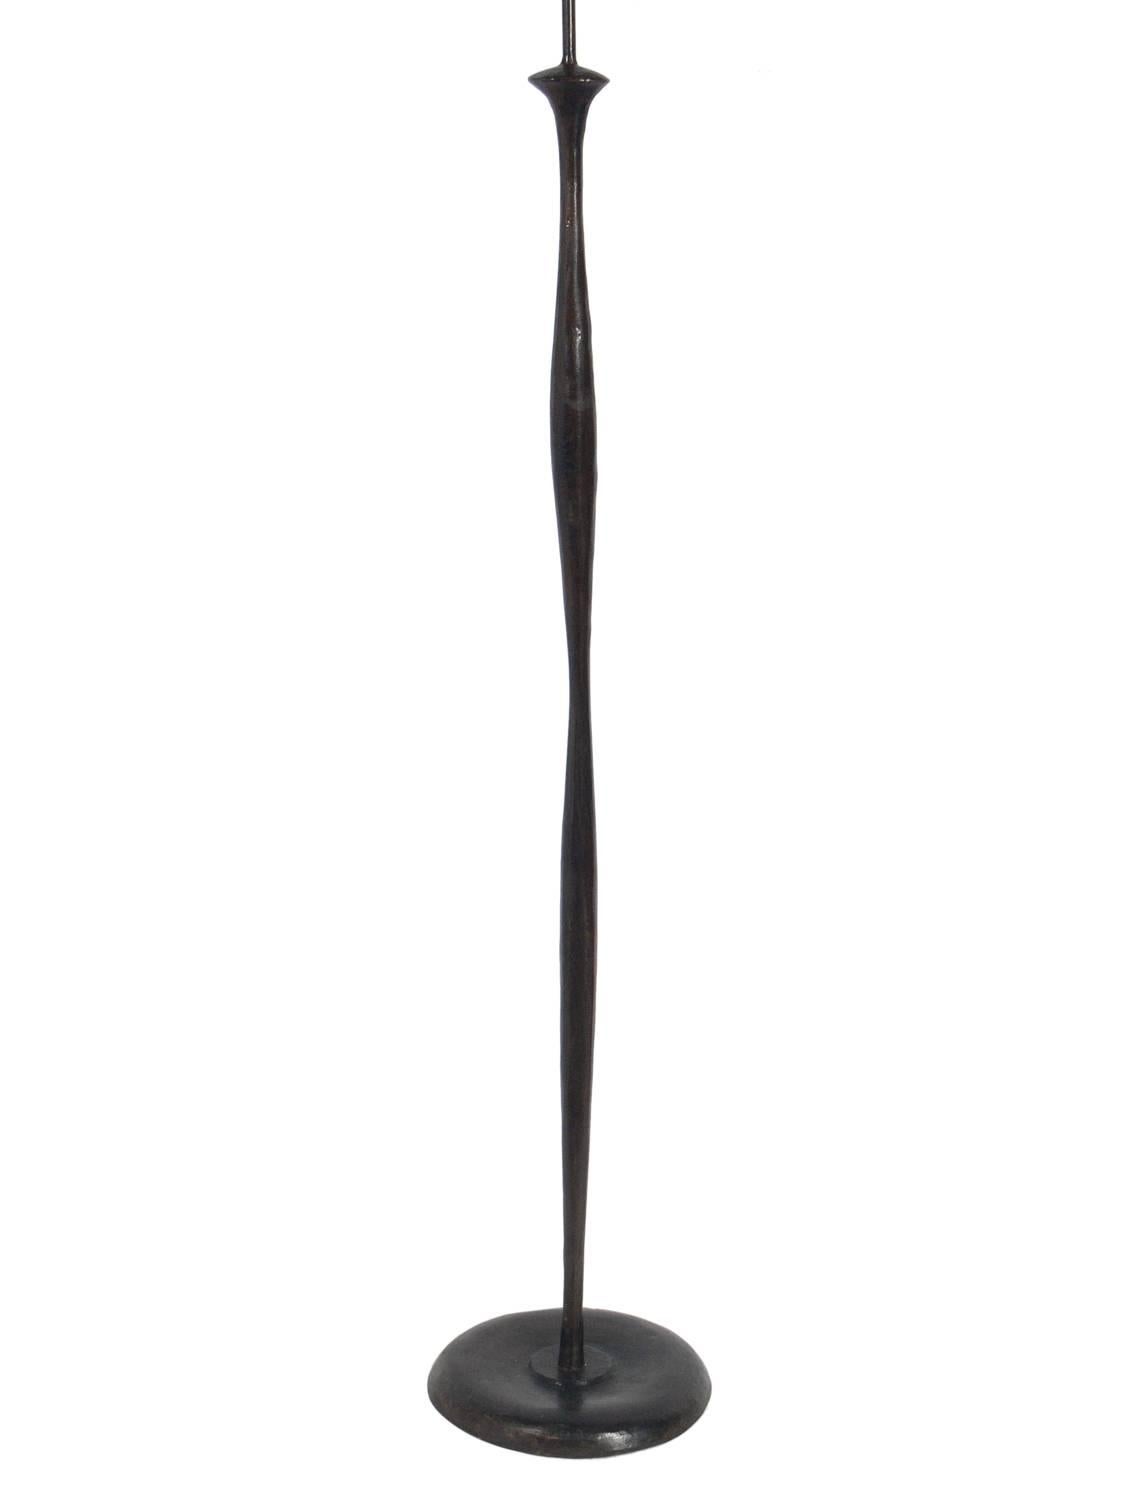 Sculptural solid bronze floor lamp, circa 1970s. Rewired and ready to use. Price noted below includes shade.